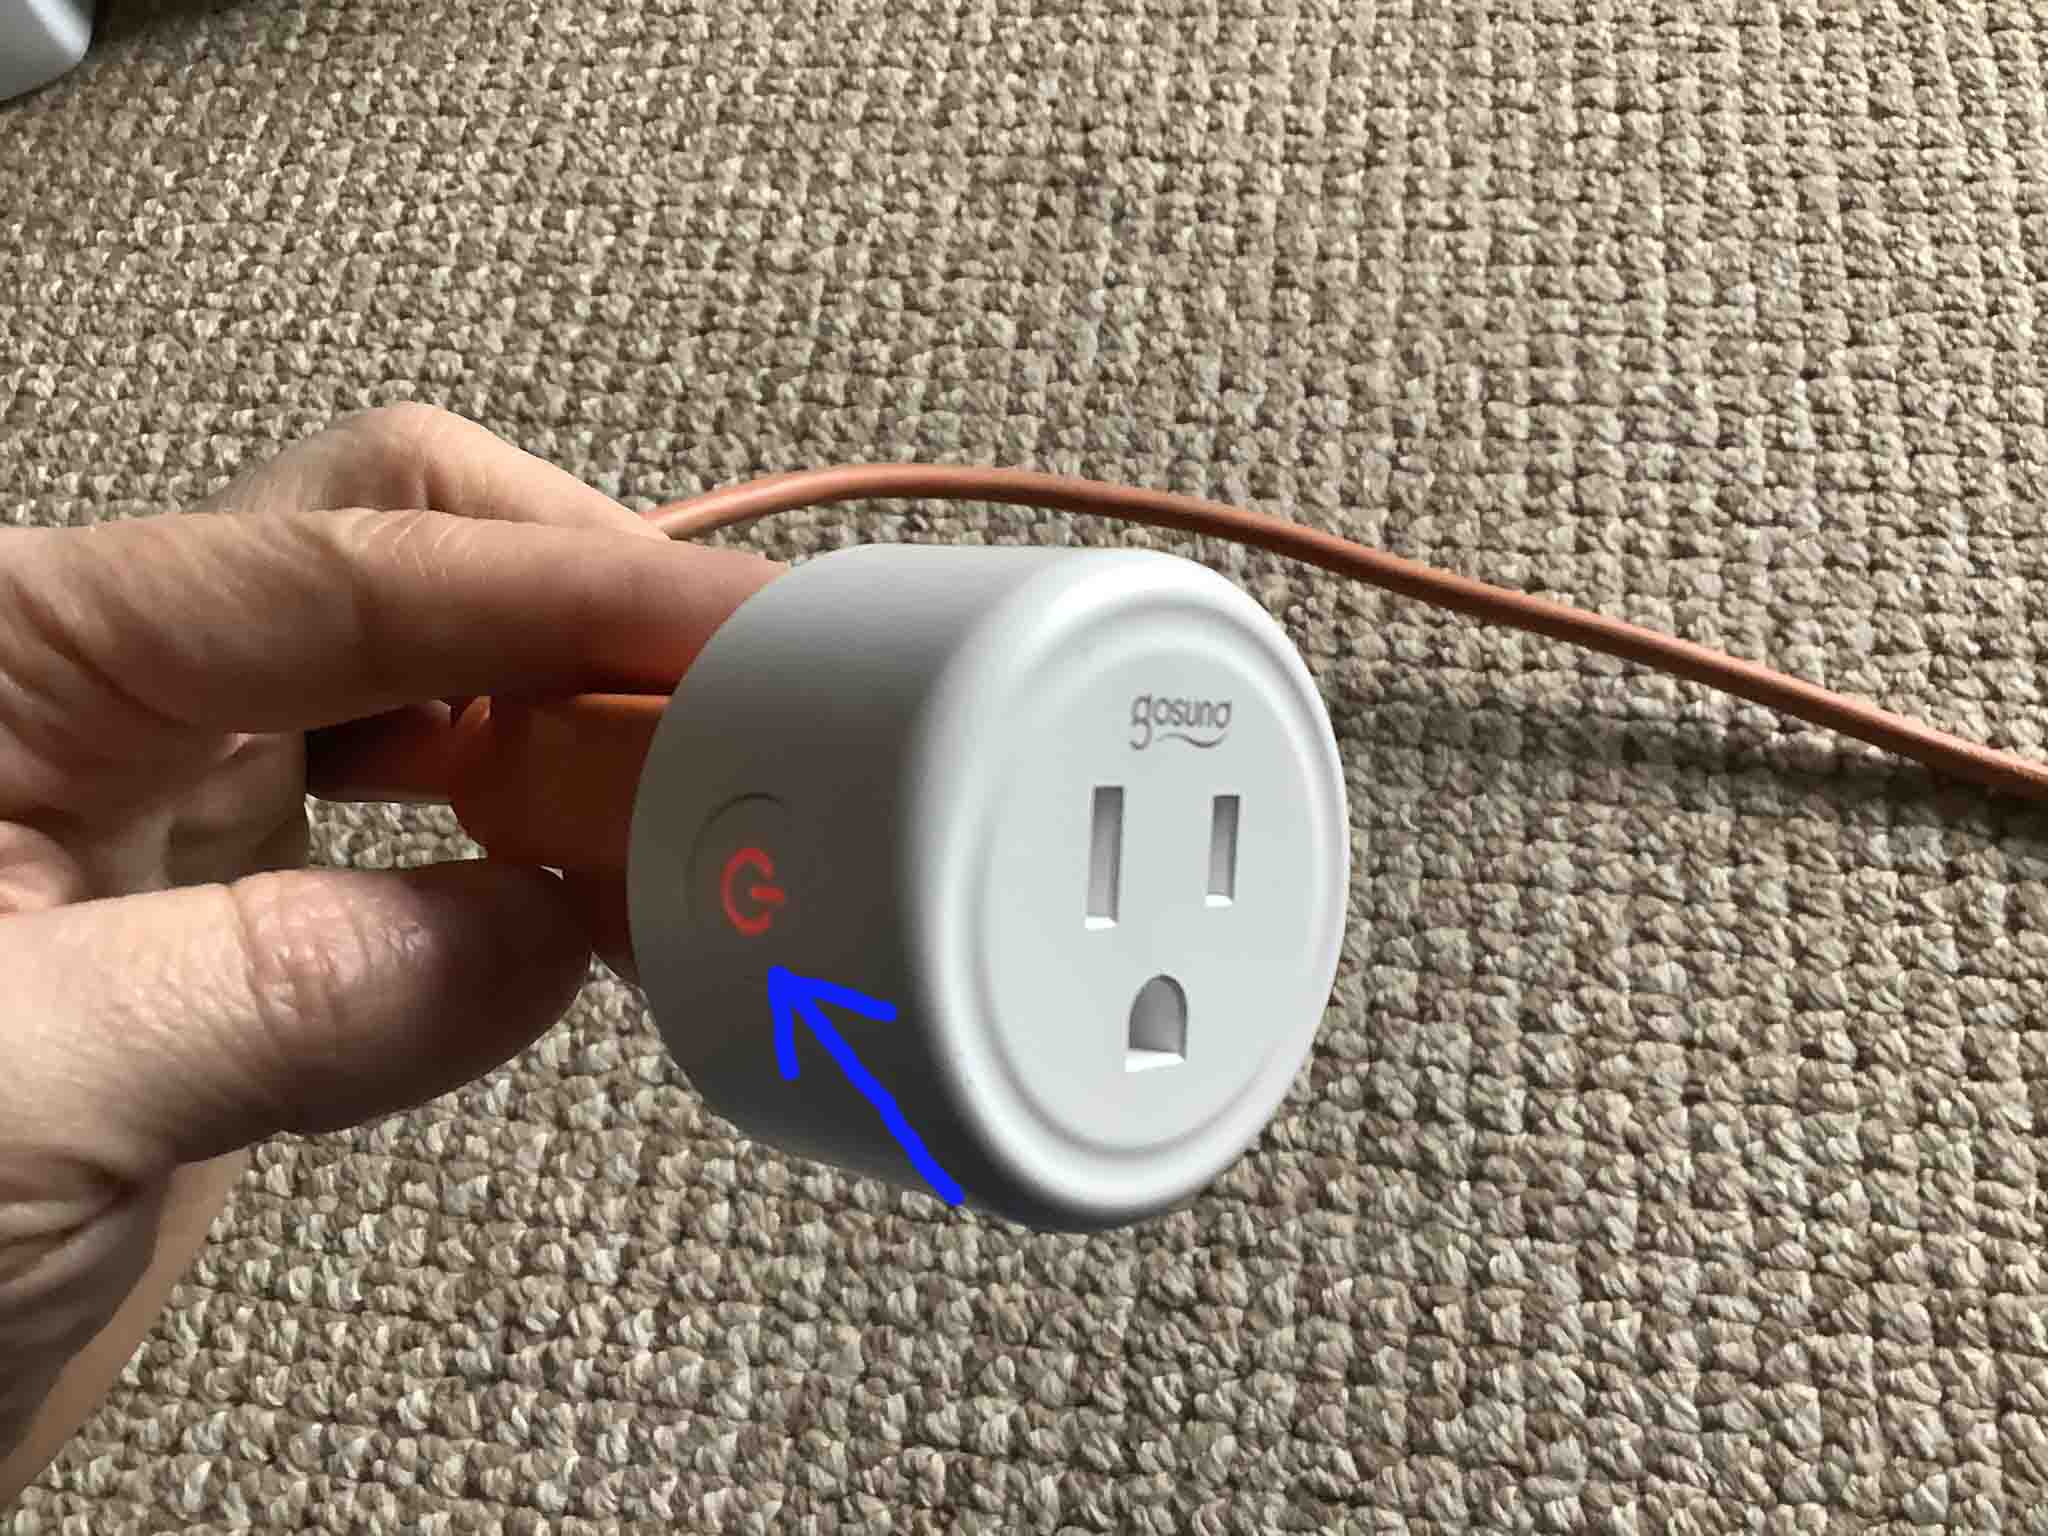 gosund smart plug not working after power outage